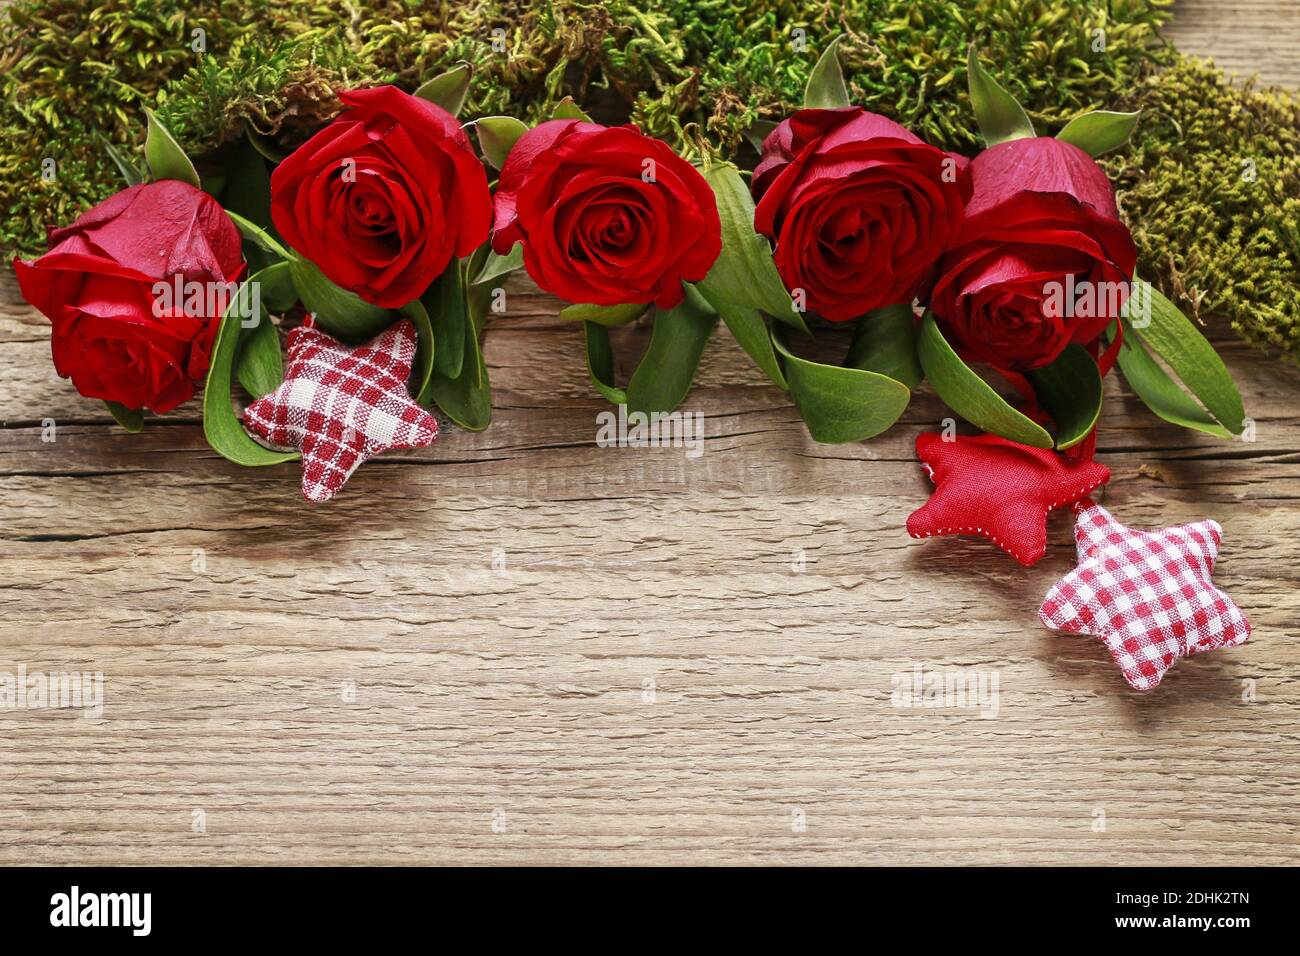 Red roses, mistletoe, fabric stars and moss on wooden background, copy space. Stock Photo